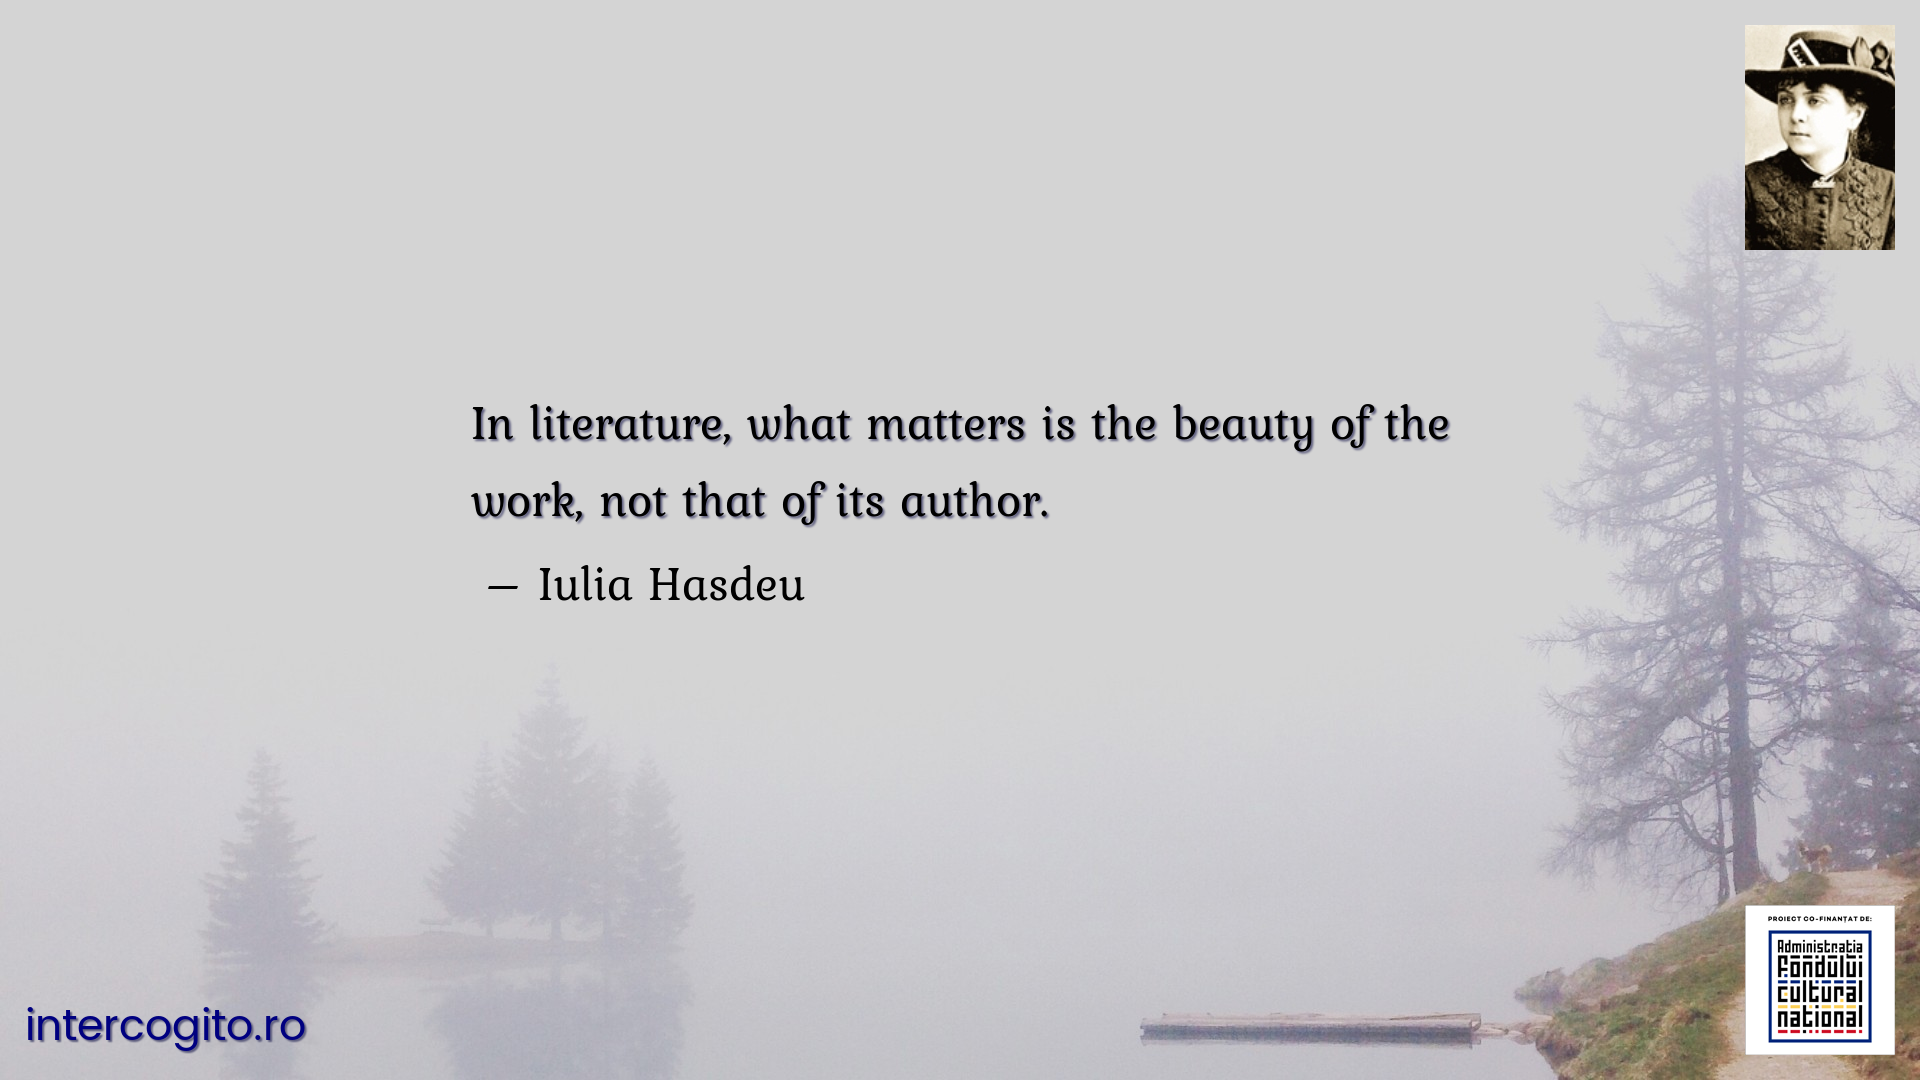 In literature, what matters is the beauty of the work, not that of its author.